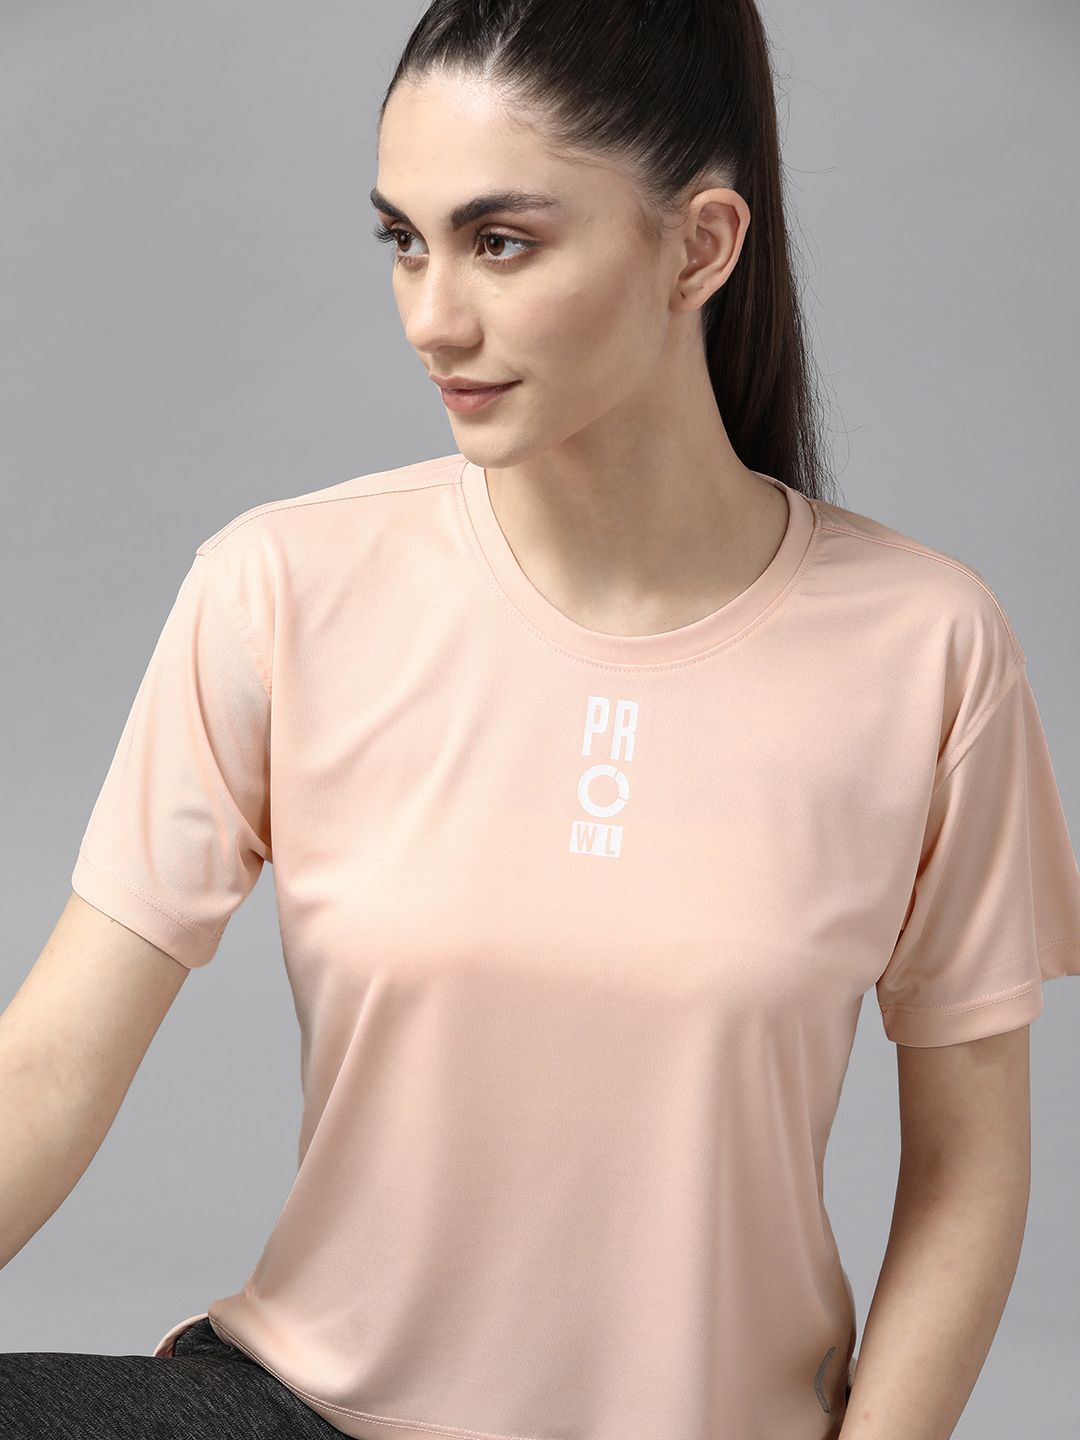 PROWL by Tiger Shroff Women Peach-Coloured Brand Logo Printed T-shirt Price in India